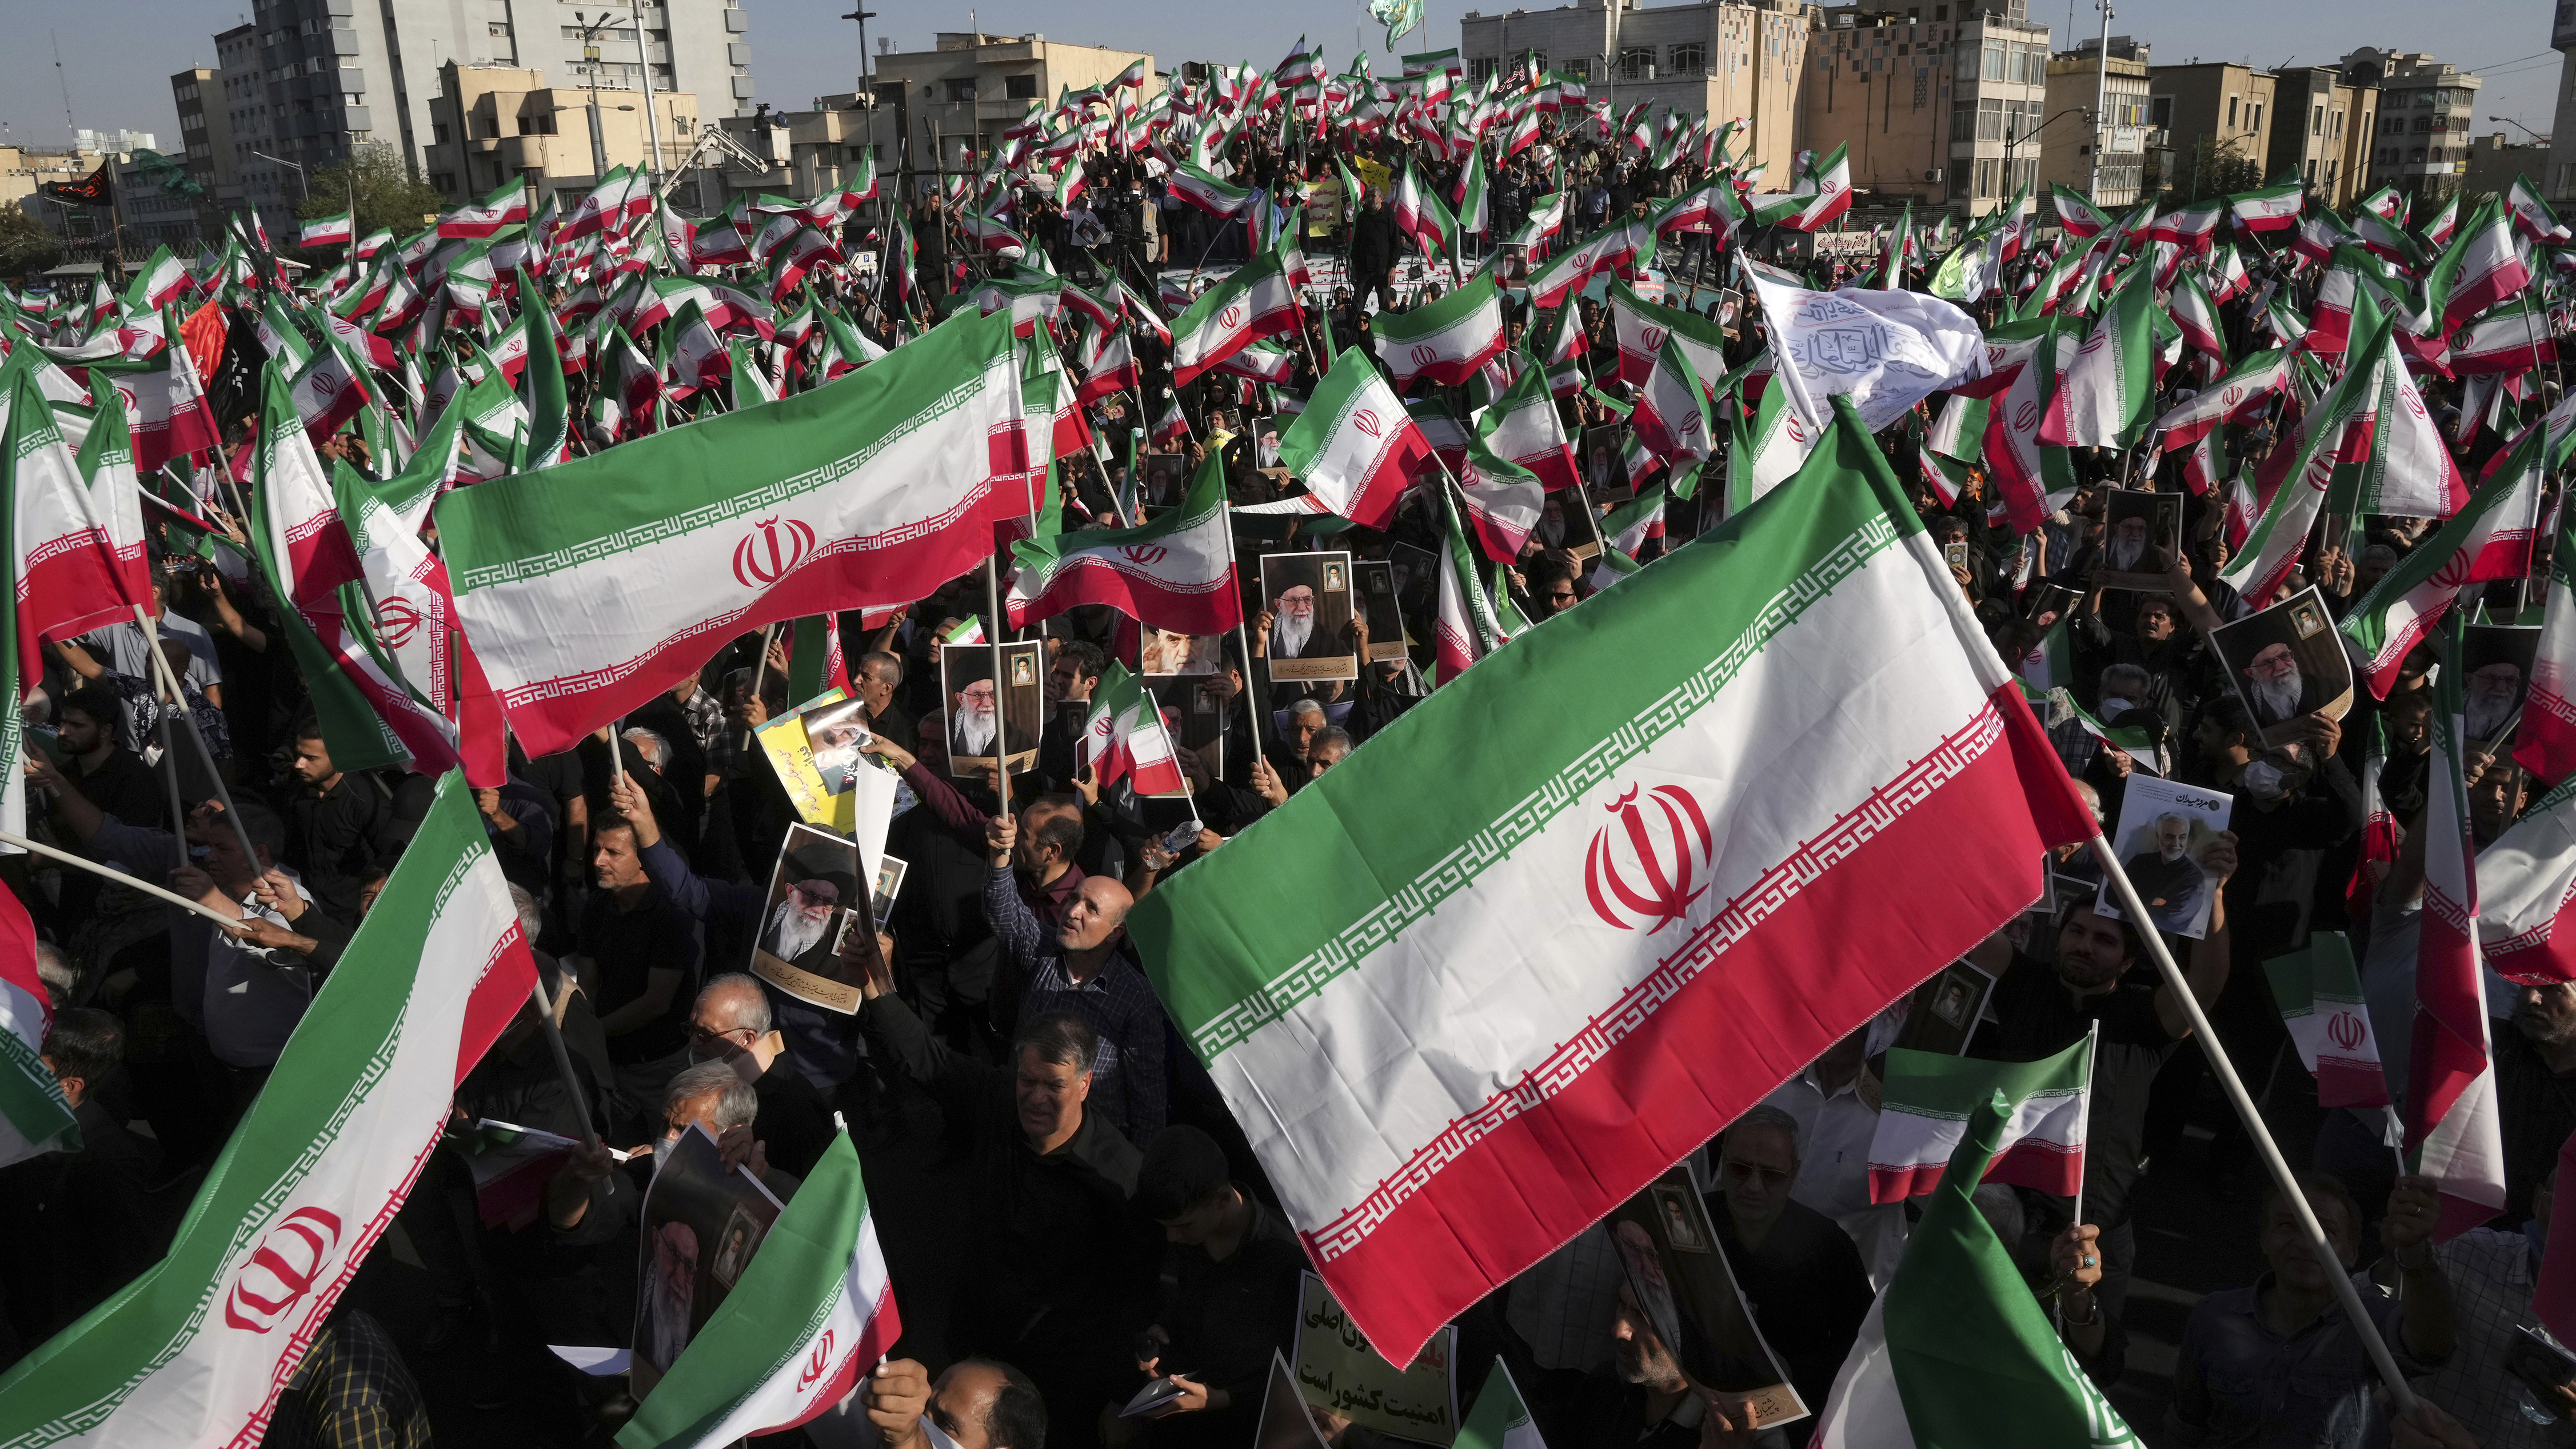 Calm days but furious nights in Iran as protests spiral - Nikkei Asia